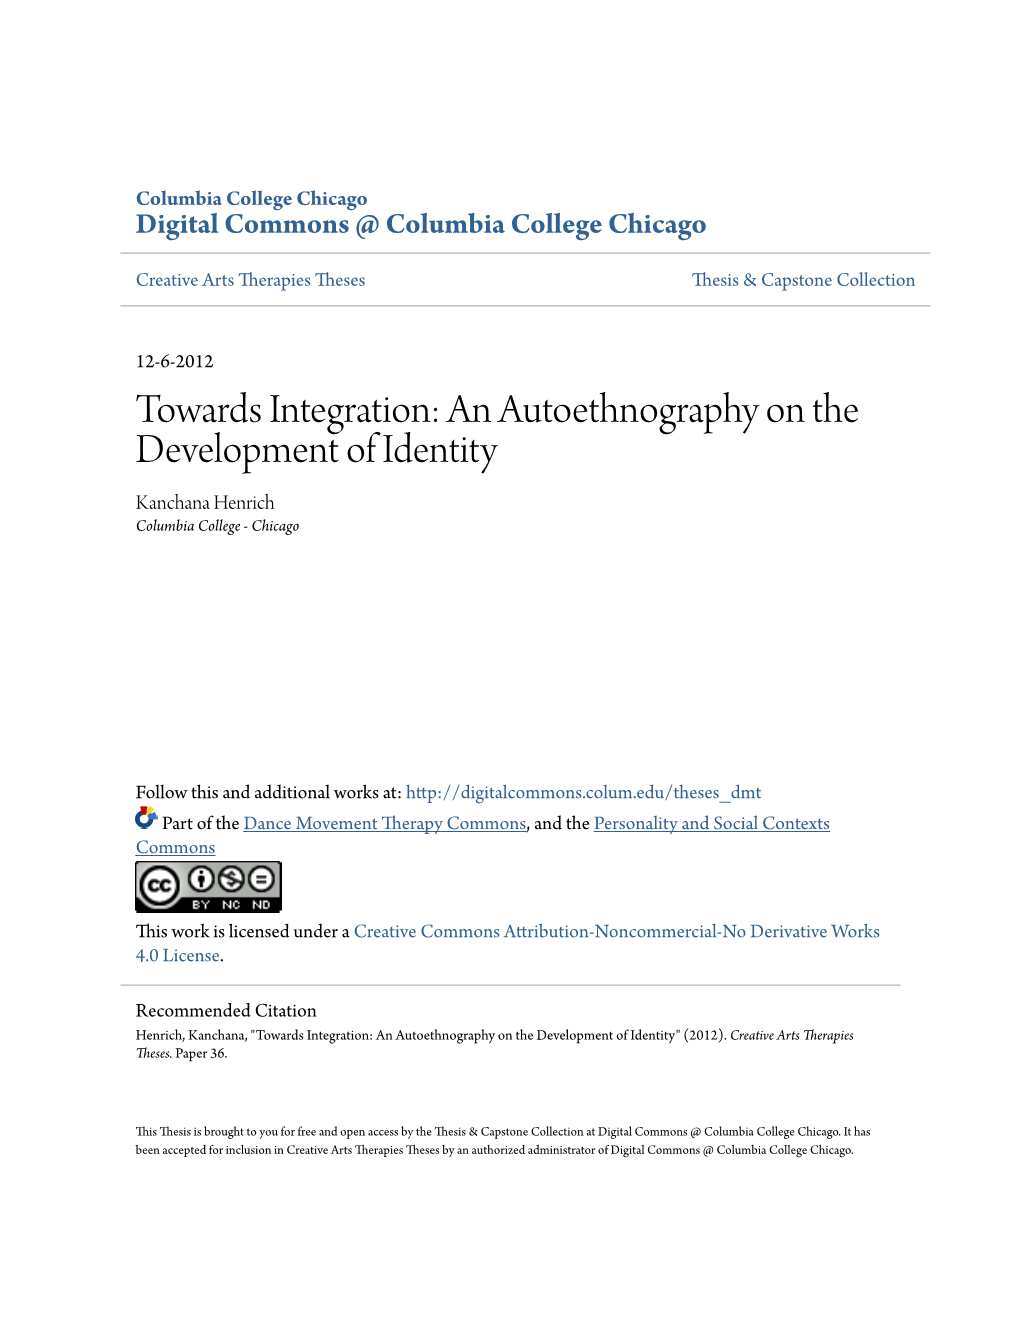 Towards Integration: an Autoethnography on the Development of Identity Kanchana Henrich Columbia College - Chicago